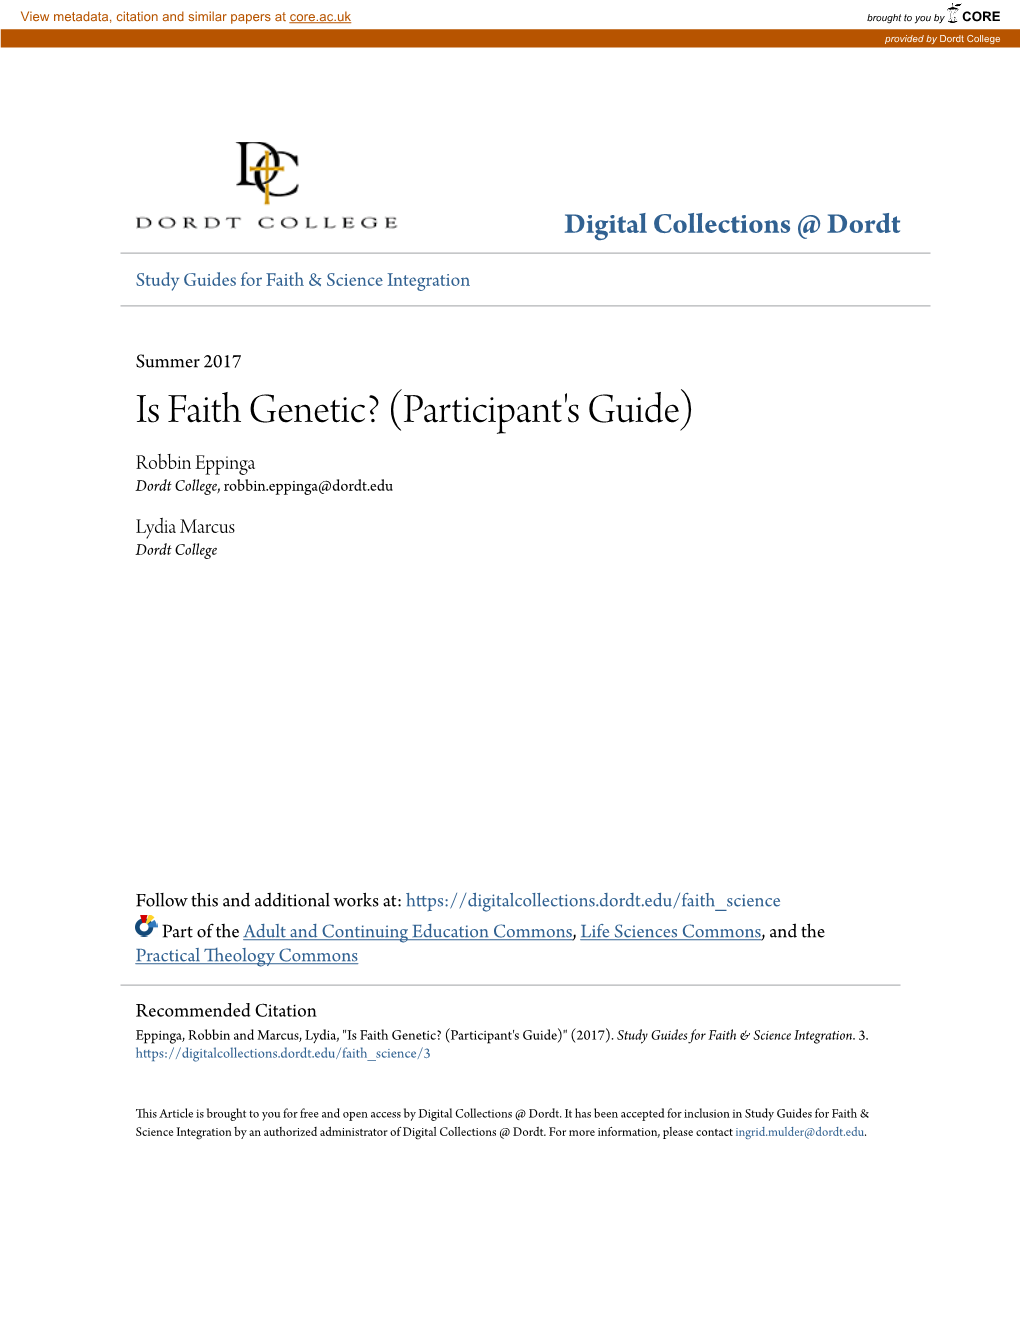 Is Faith Genetic? (Participant's Guide) Robbin Eppinga Dordt College, Robbin.Eppinga@Dordt.Edu